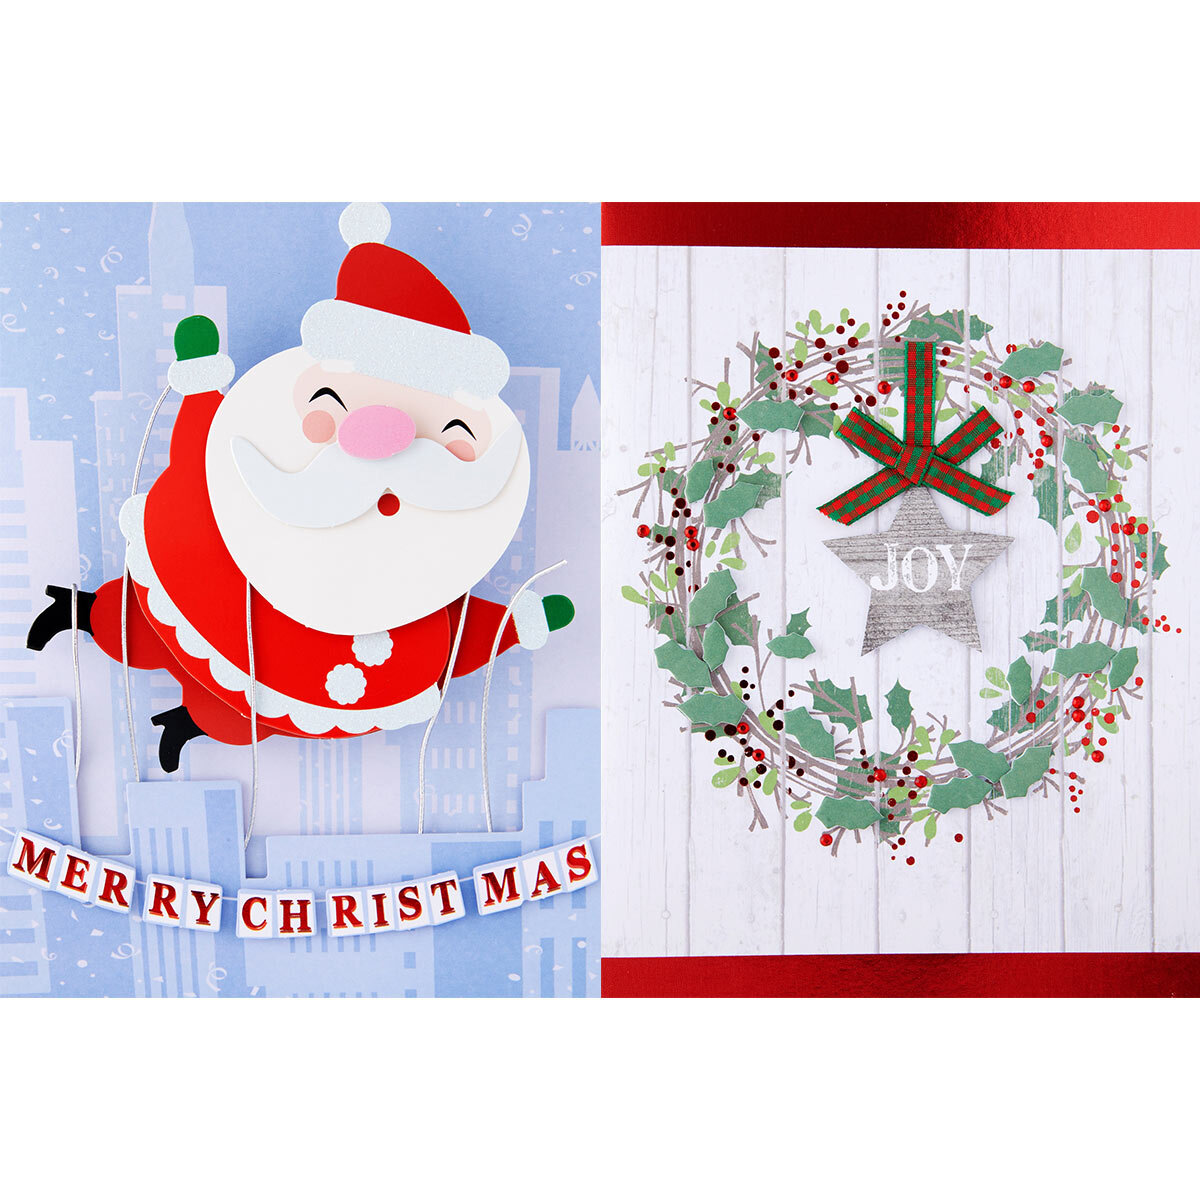 Buy 30 Pack Handmade Christmas Cards Combined Set4 Image at Costco.co.uk